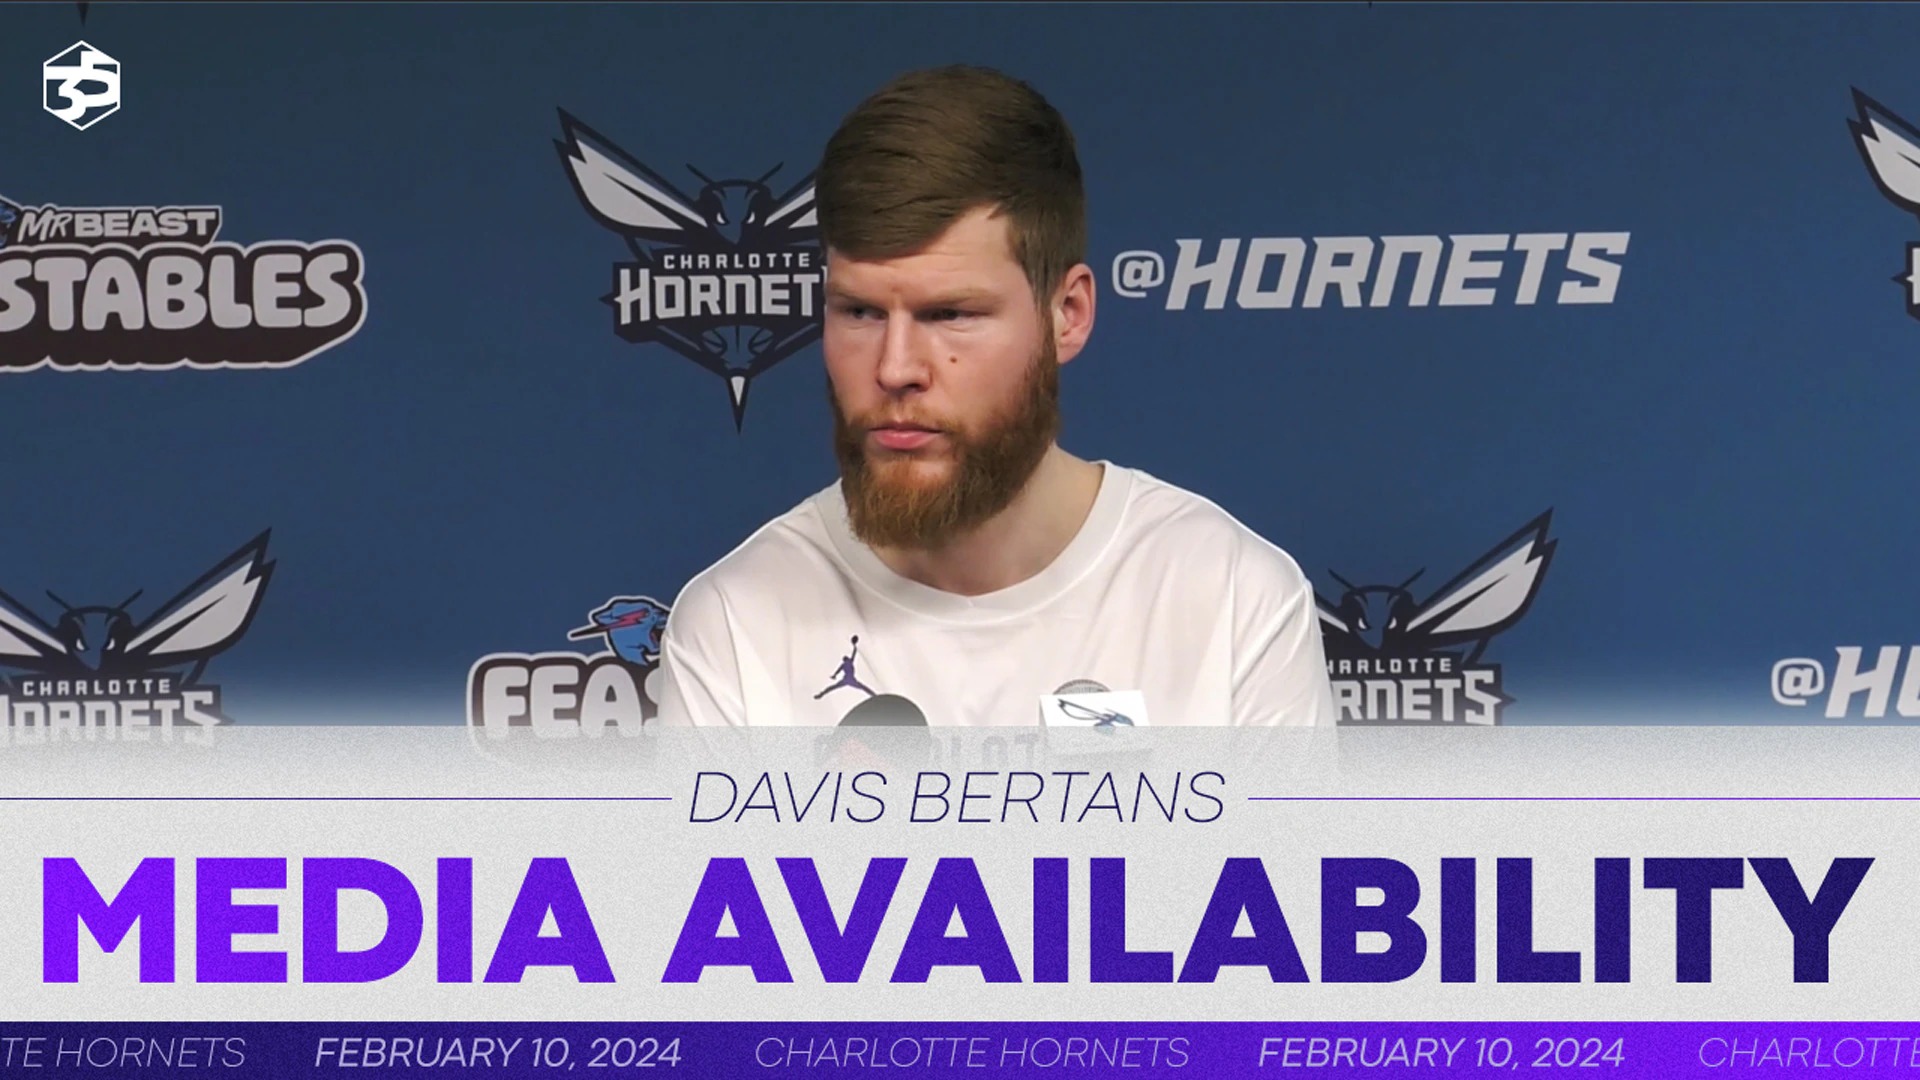 BREAKING NEWS: Dallas Mavericks Send Brutal Social Media Message for Davis Bertans After His Exit from the Team Following Contract Dispute